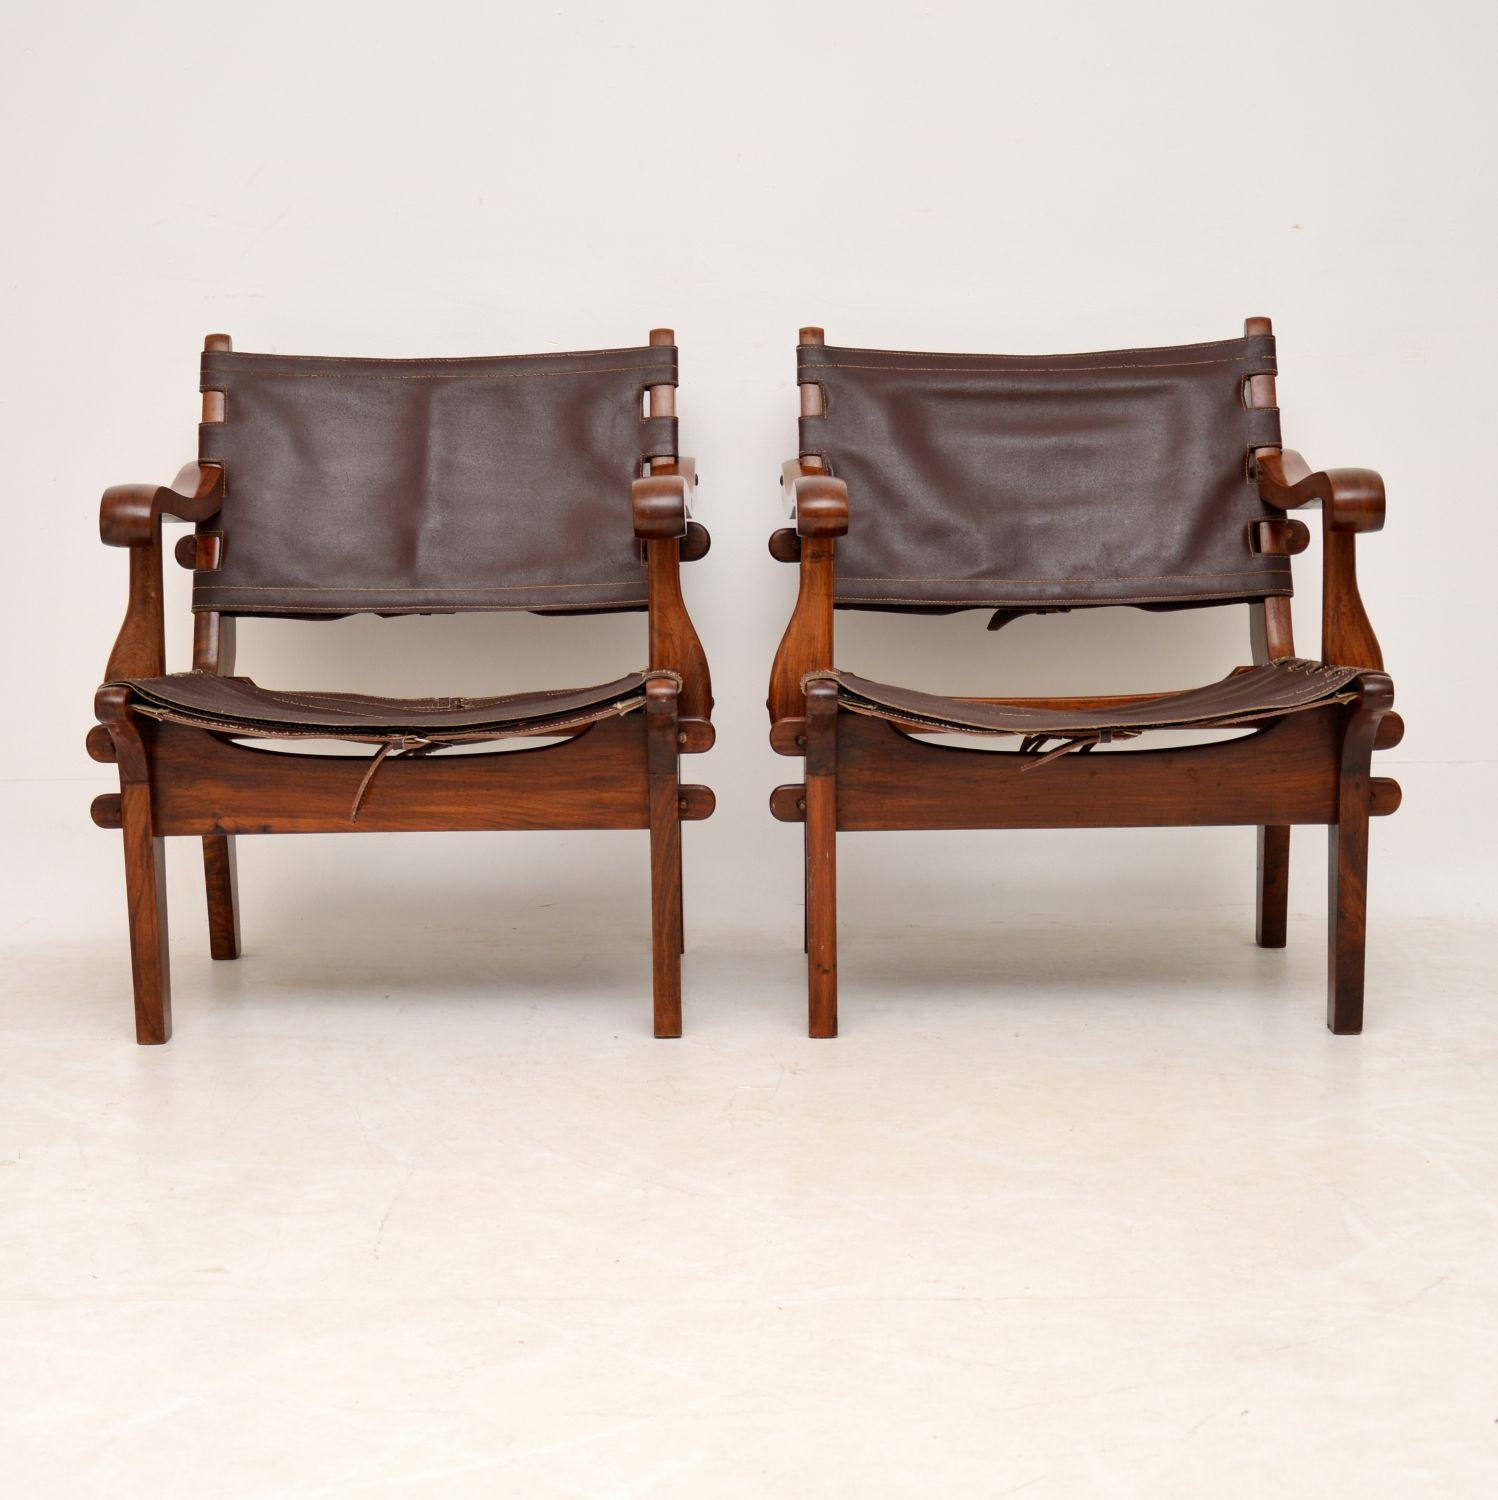 A stunning and rare pair of vintage safari chairs in solid wood and leather, these were made in Equador in the 1960s, they were designed by Angel Pazmino. They are in excellent vintage condition, the frames are all clean, sturdy and sound, with only